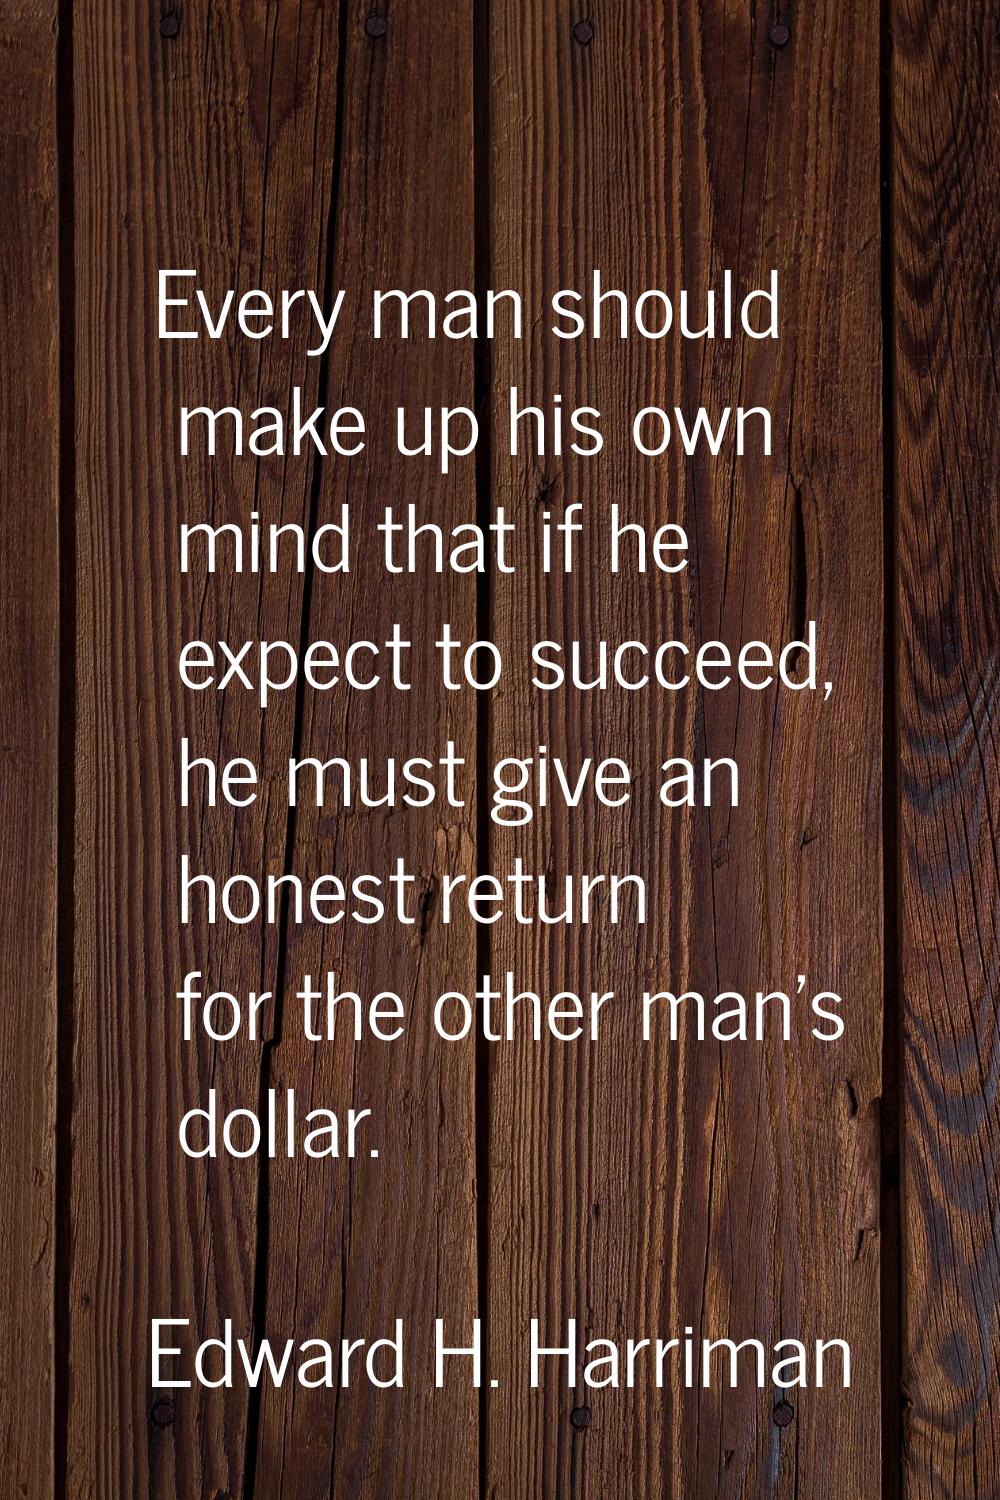 Every man should make up his own mind that if he expect to succeed, he must give an honest return f